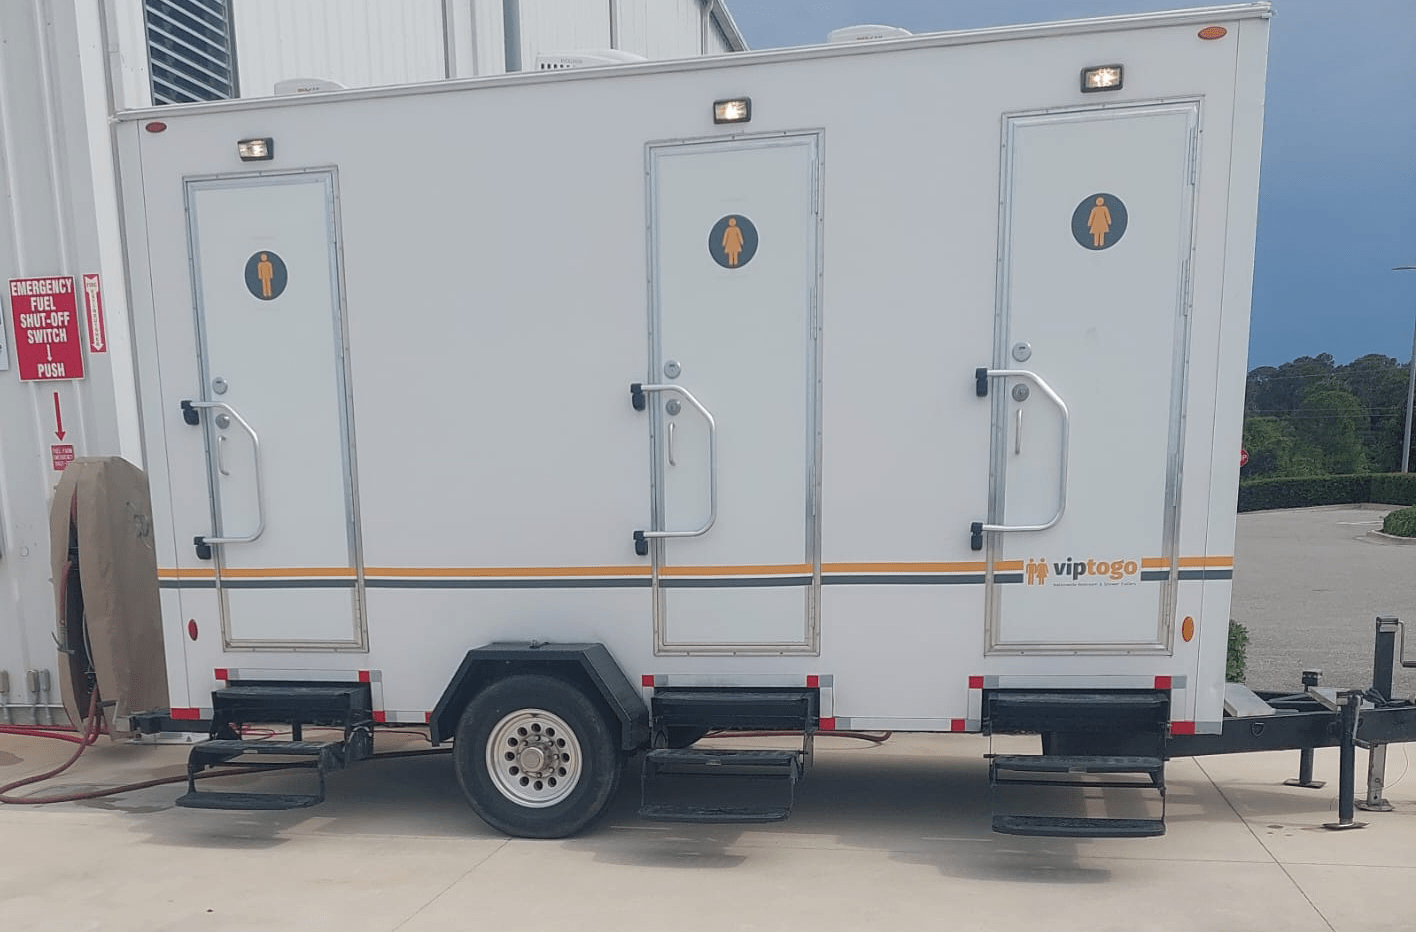 construction restroom trailers and rentals from VIP to Go